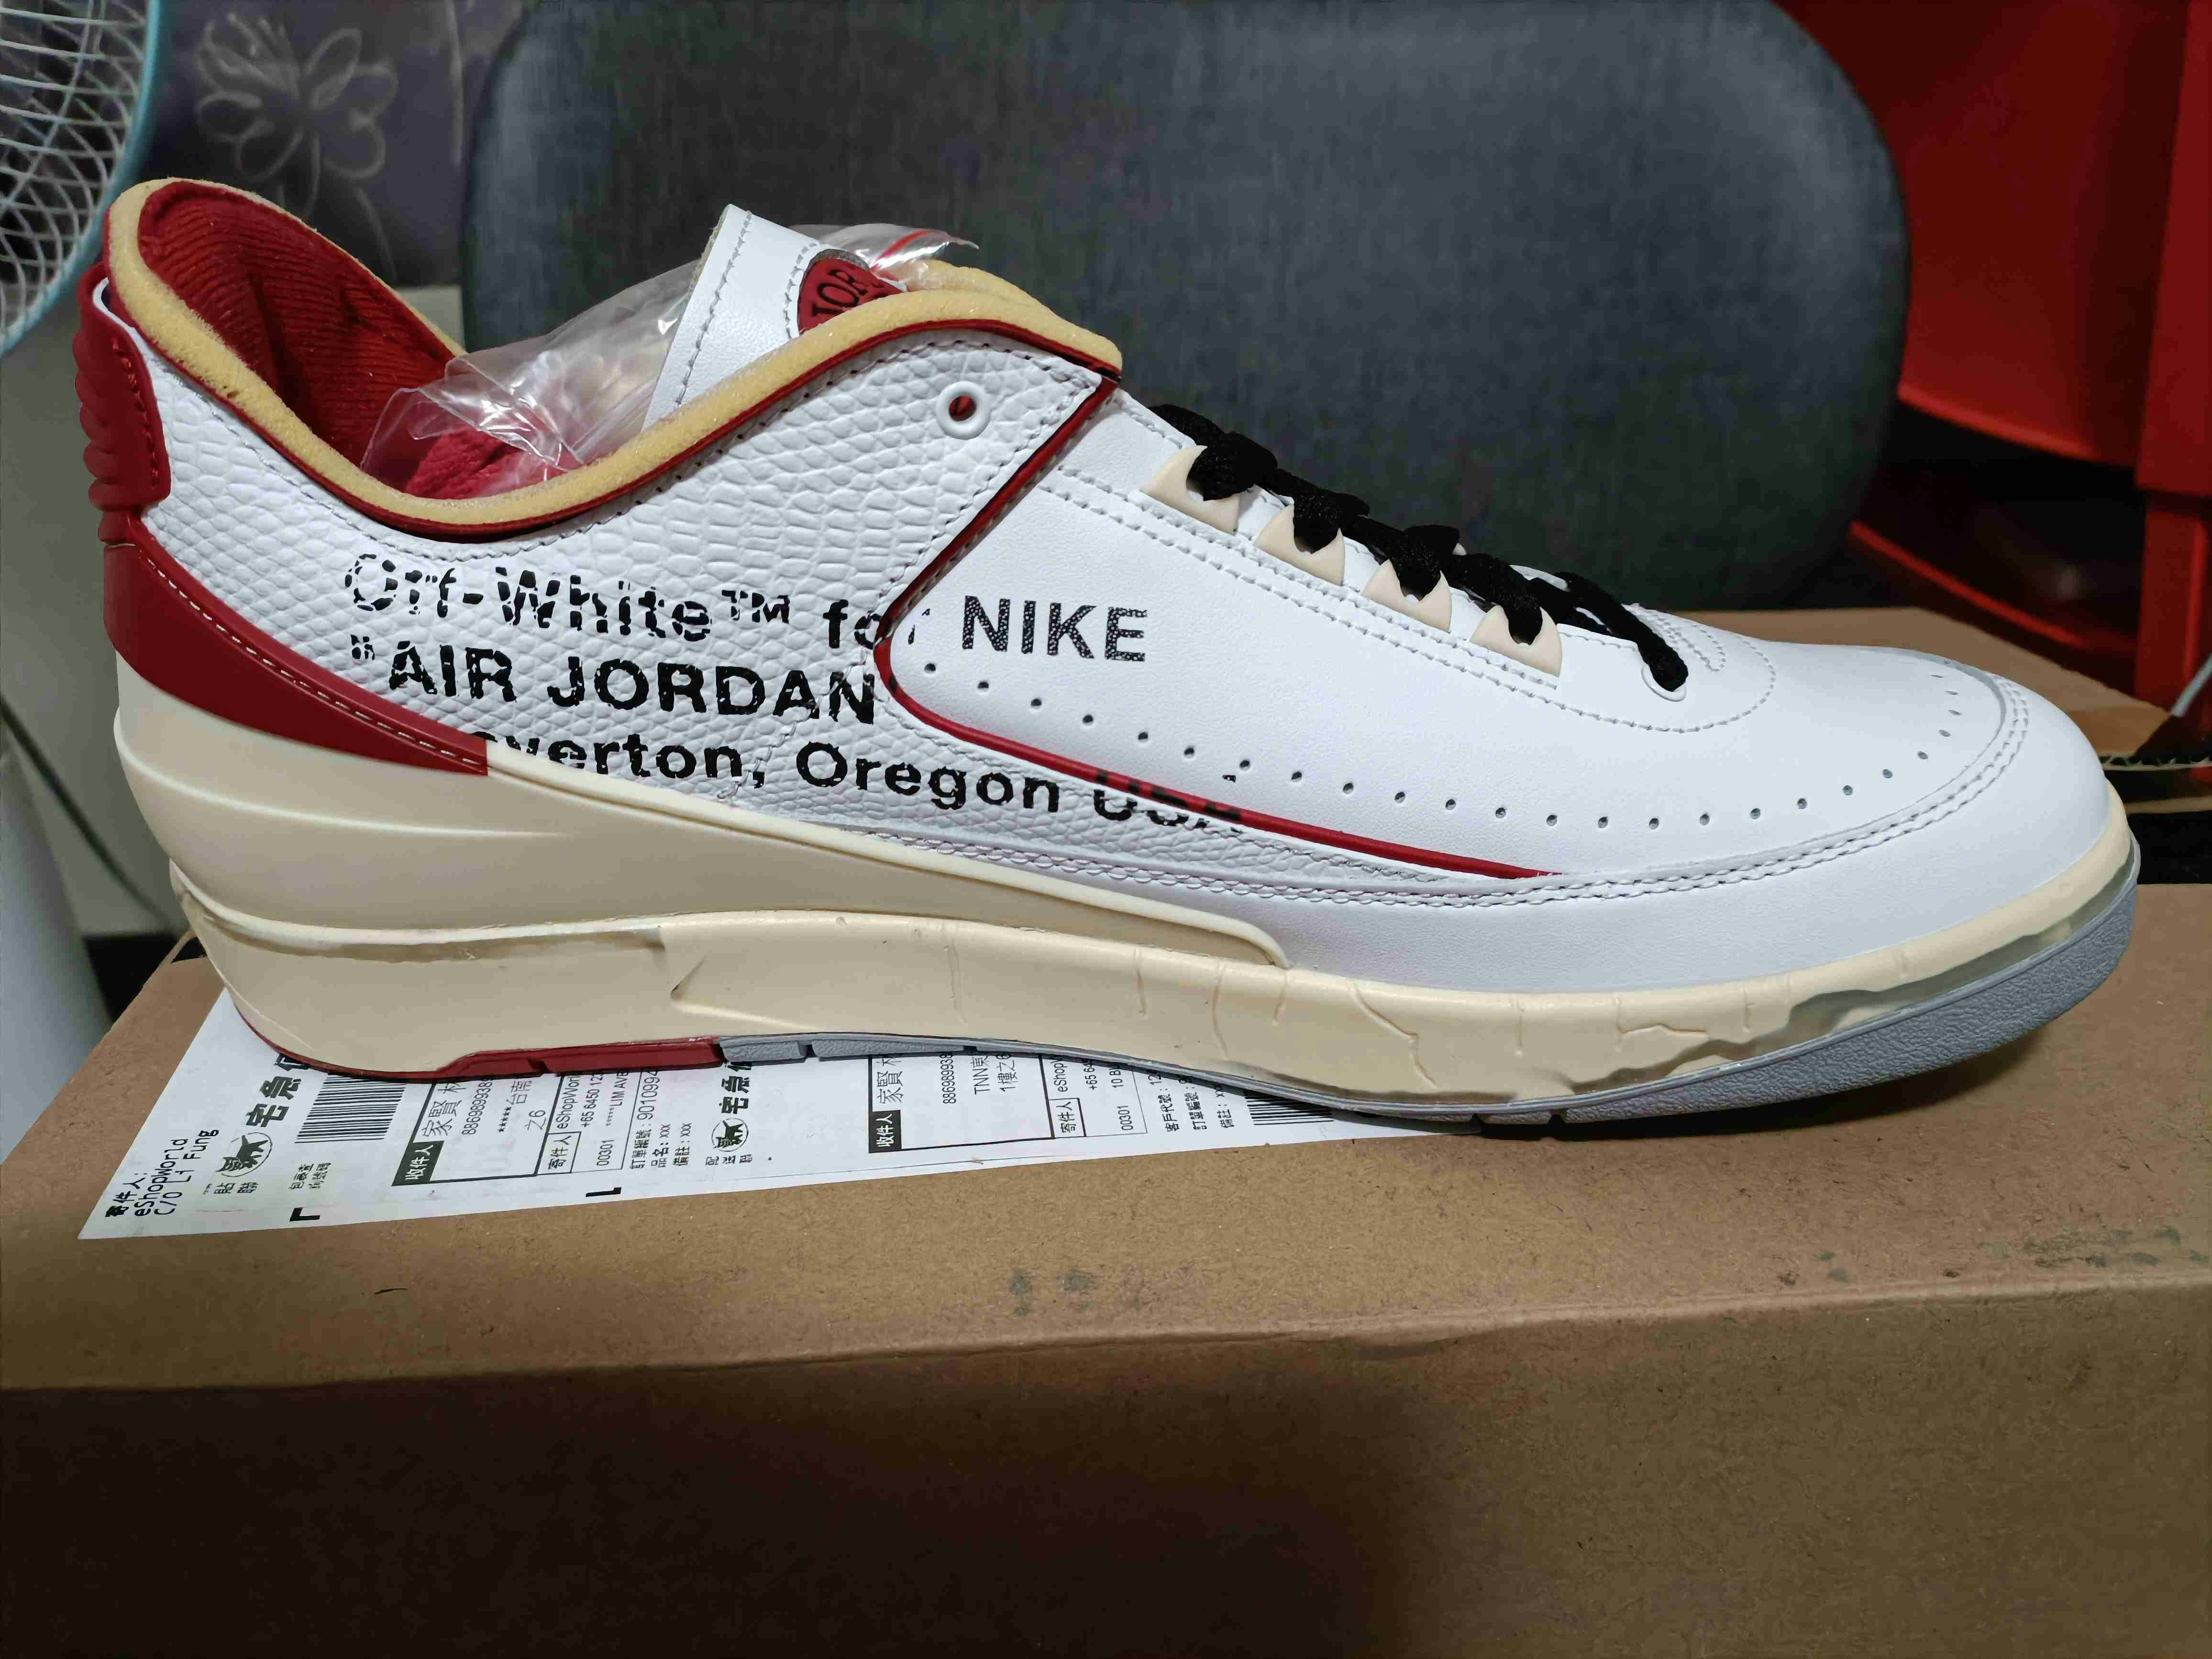 Off-White x Air Jordan 2 Low White Red DJ4375-106 Release Date - SBD